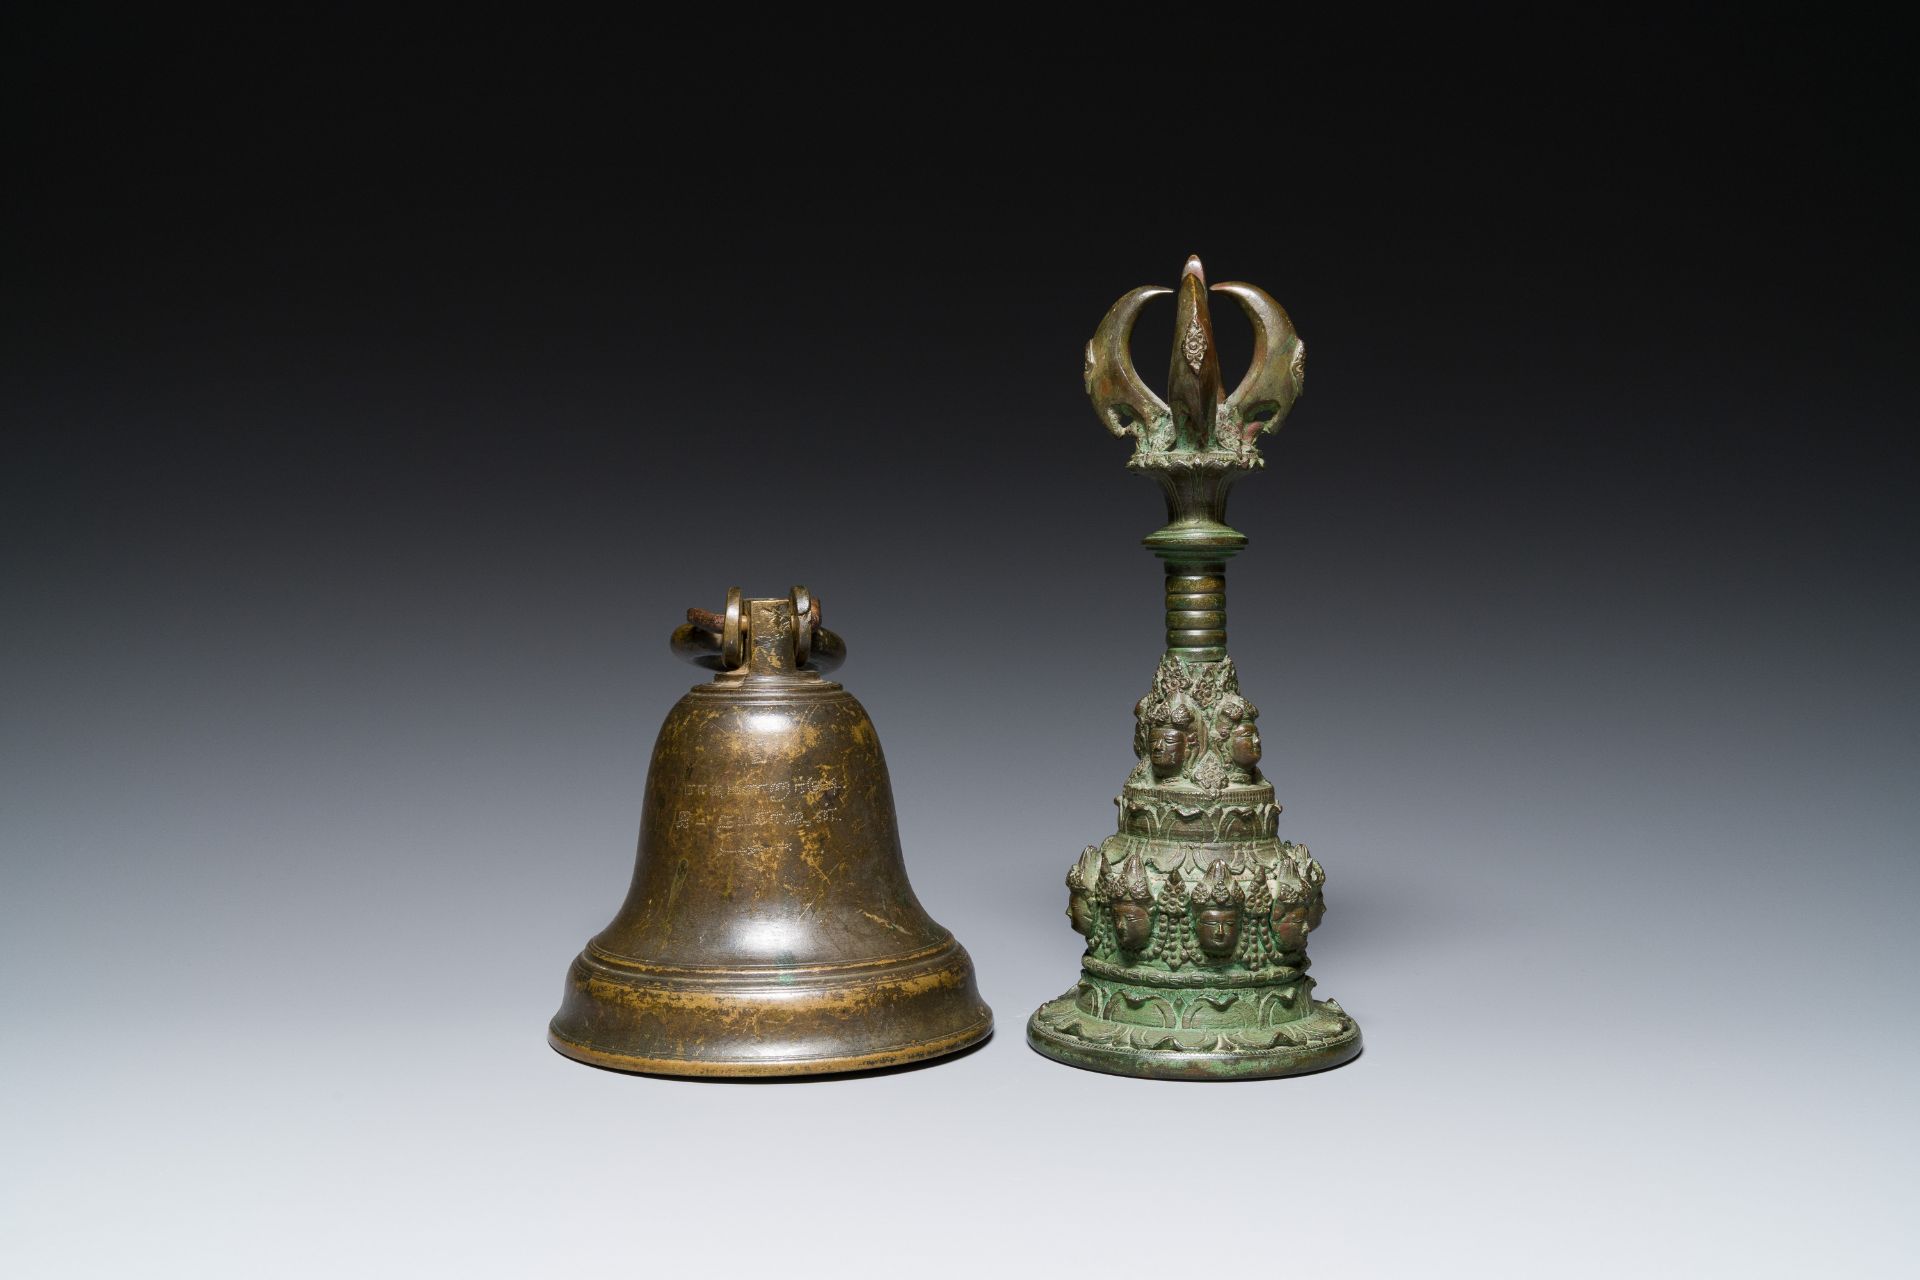 A bronze bell and a ceremonial hand bell, South Asia and Southeast Asia, 19th C. or earlier - Bild 6 aus 21